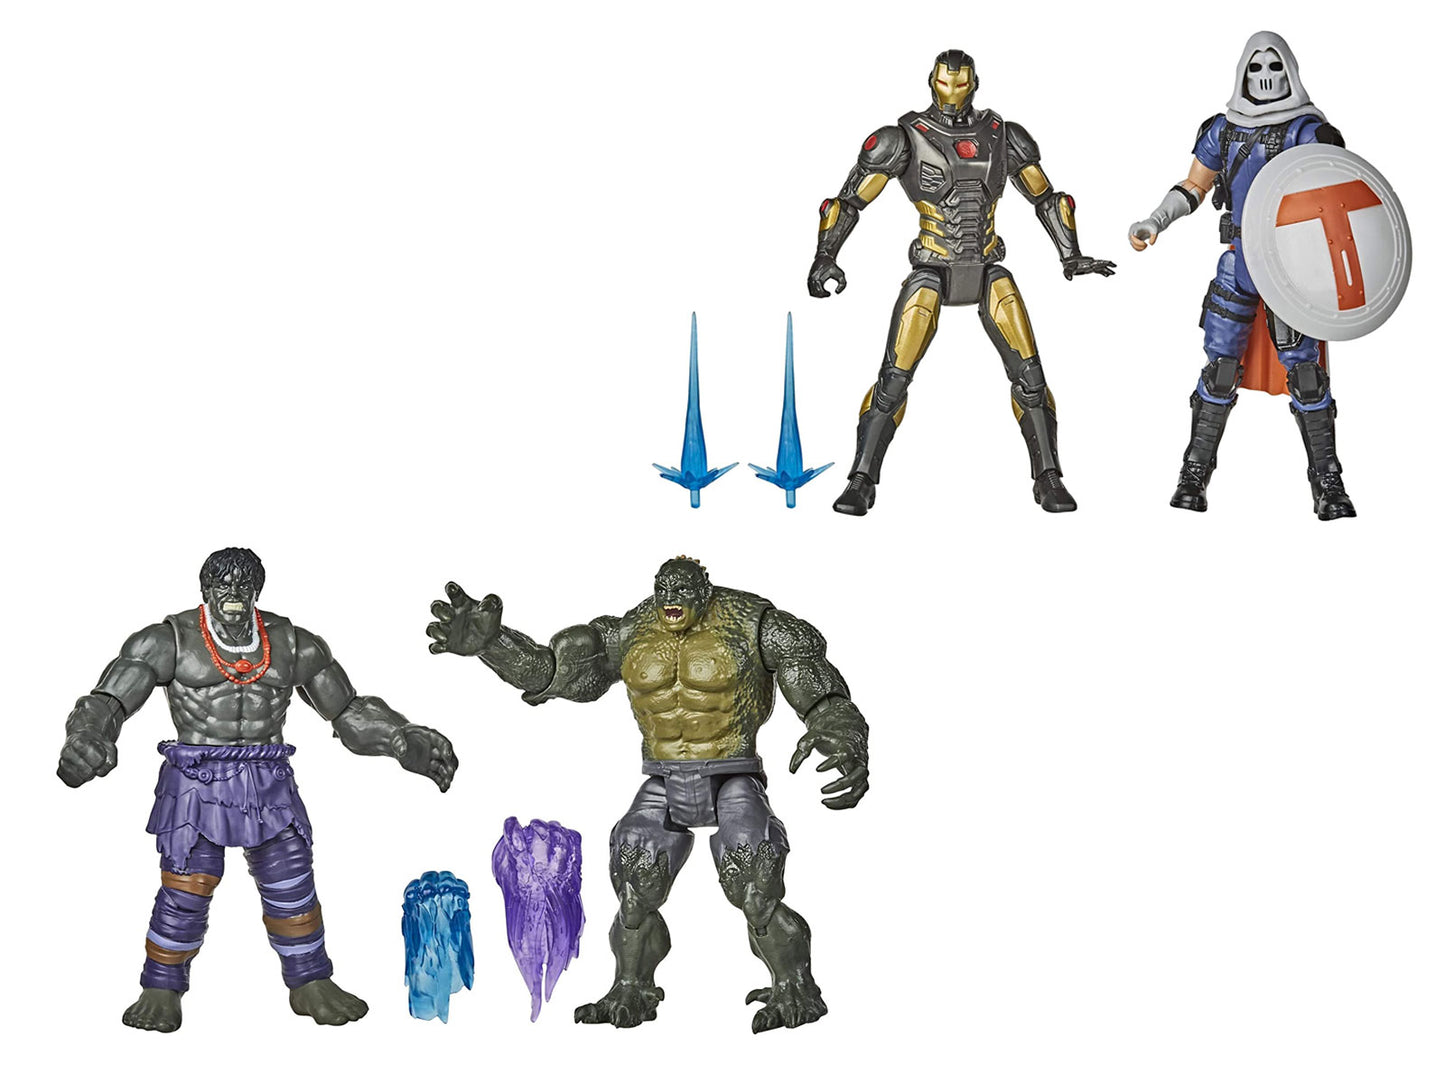 Hasbro Marvel Gamerverse 6-inch Collectible Assortment - Hulk vs. Abomination, Avengers, Iron Man and Task Master Action Figure Toys, Ages 4 and Up